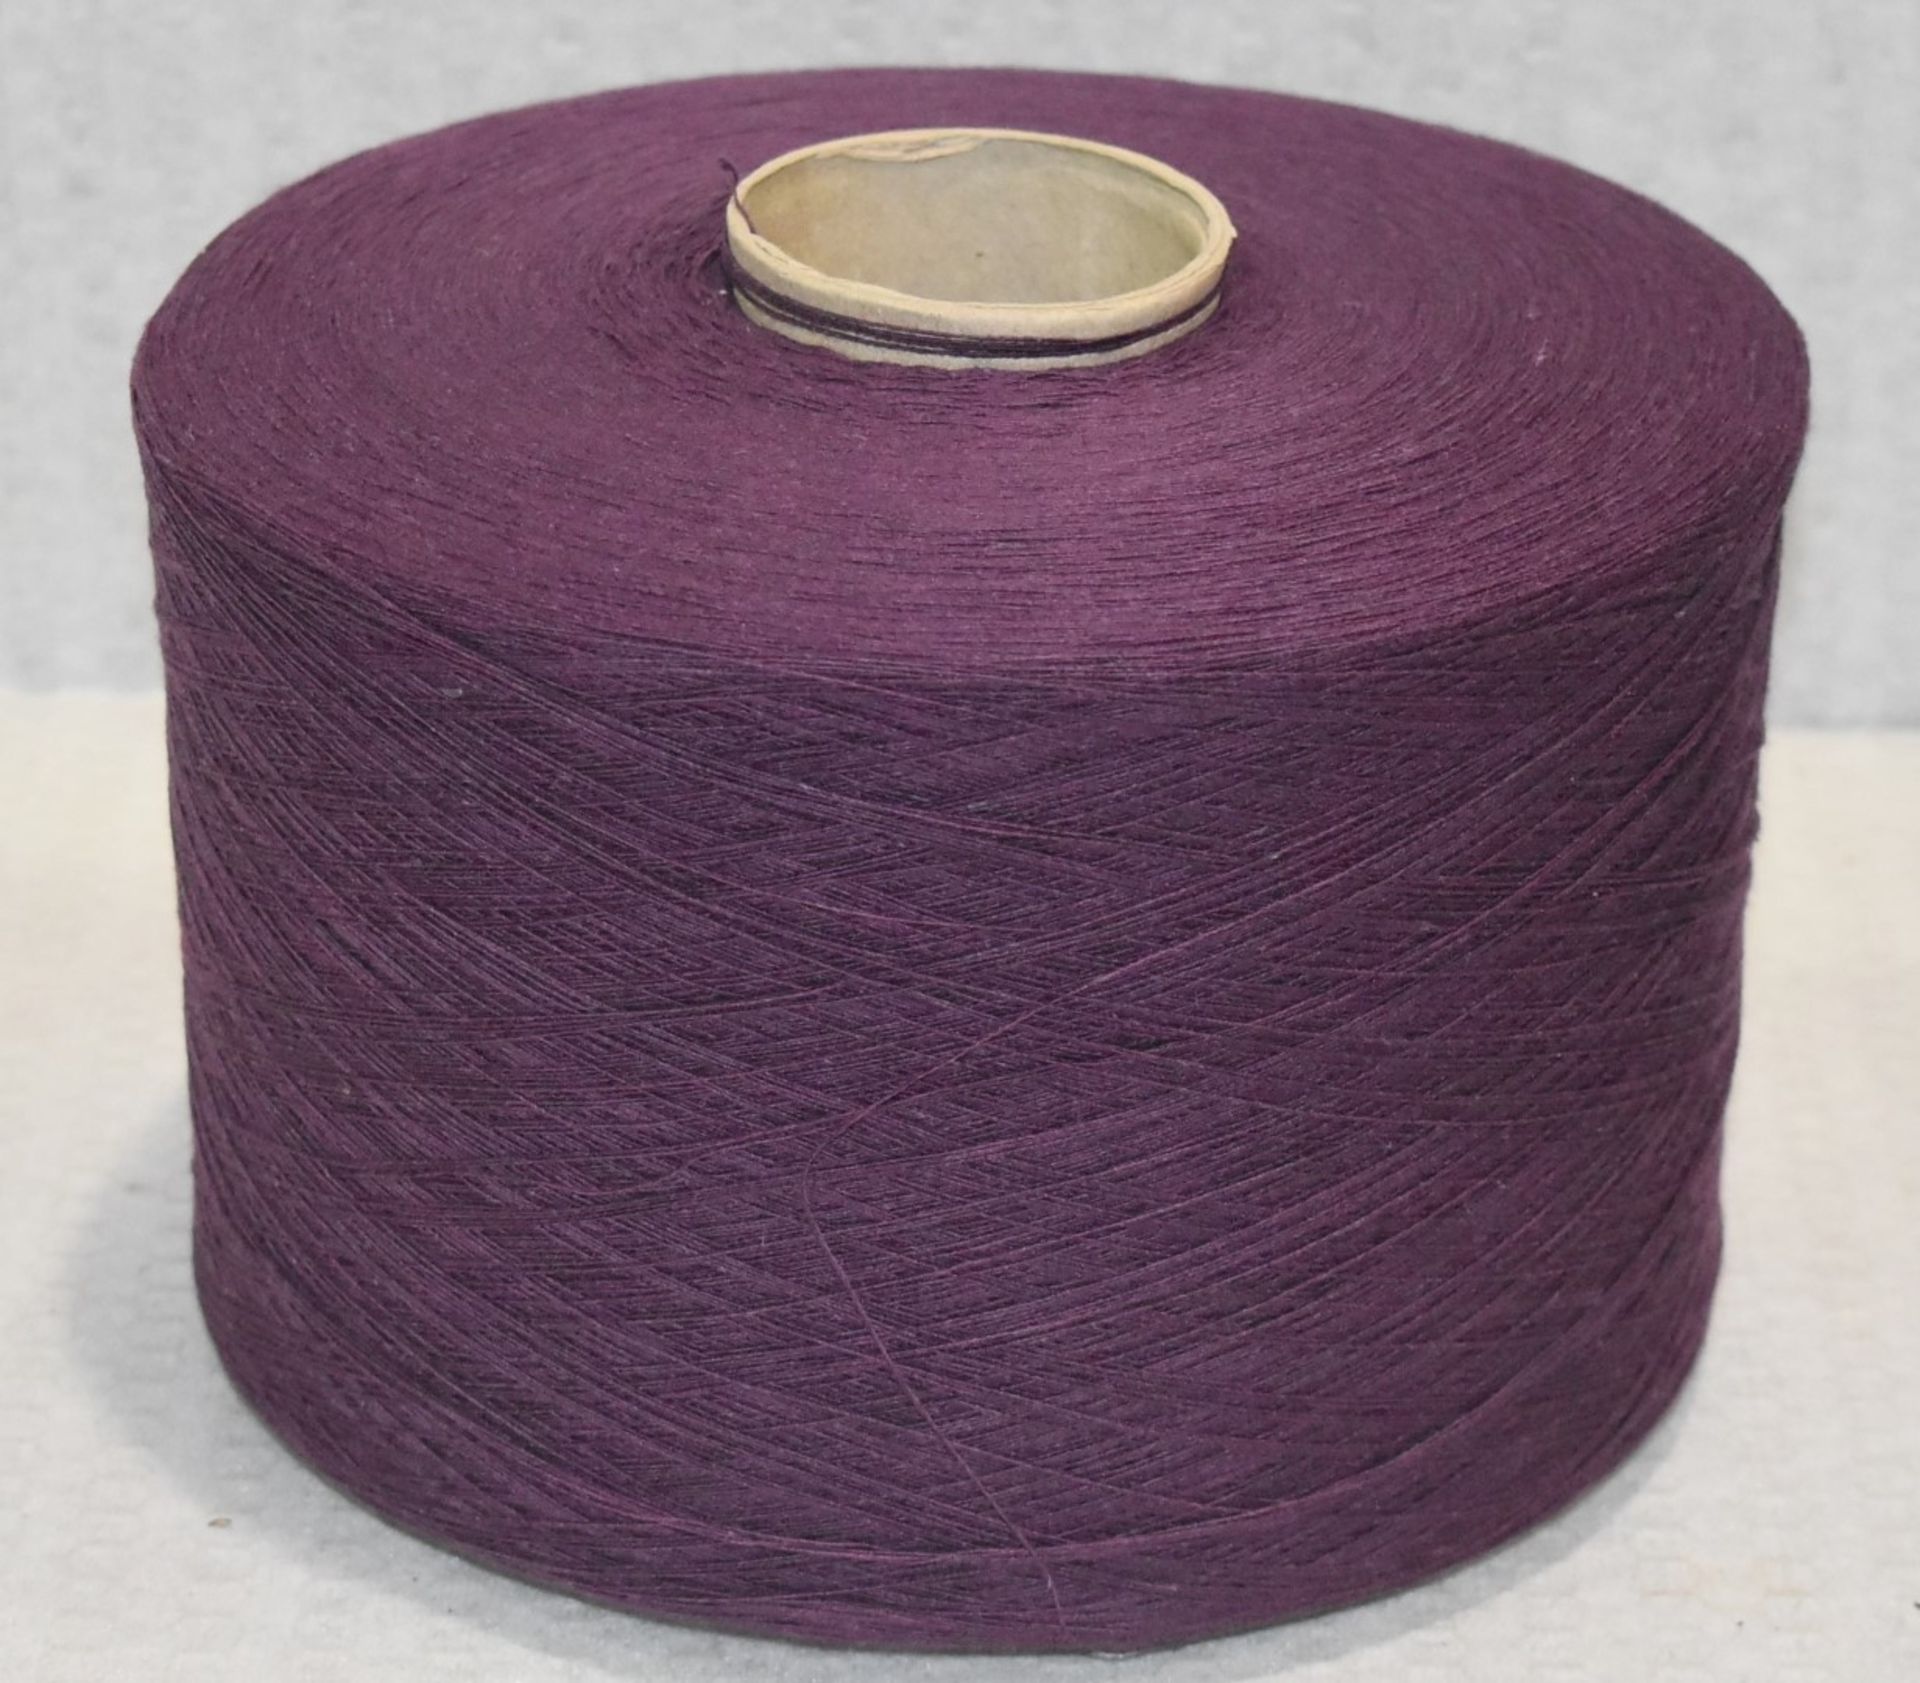 6 x Cones of 1/13 MicroCotton Knitting Yarn - Colour: Purple - Approx Weight: 2,300g - New Stock - Image 2 of 9